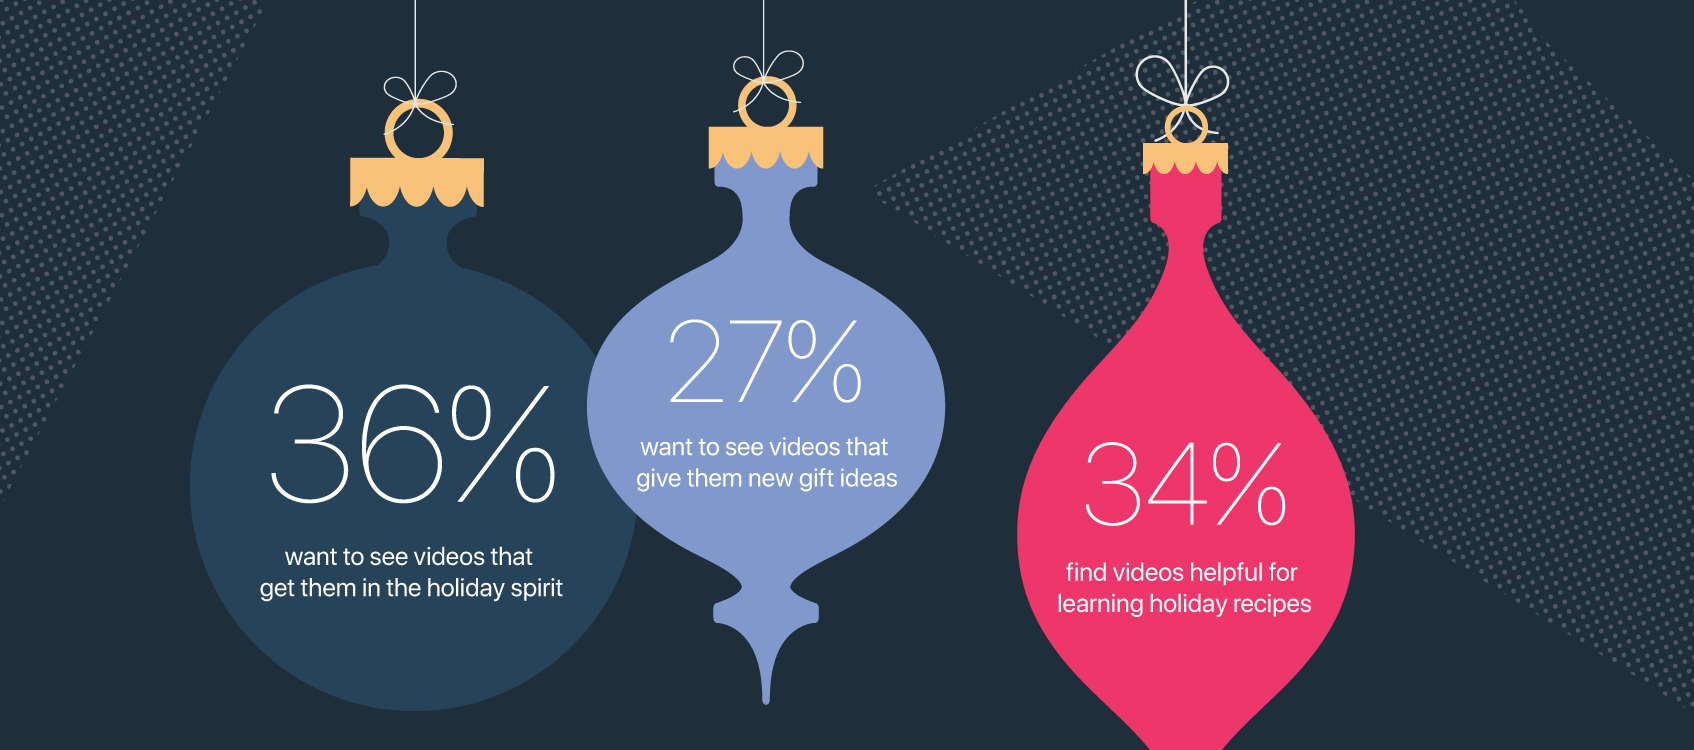 Facebook Holiday Guide Infographic: Holiday Video Advertising. 36% want to see videos that get them in the holiday spirit